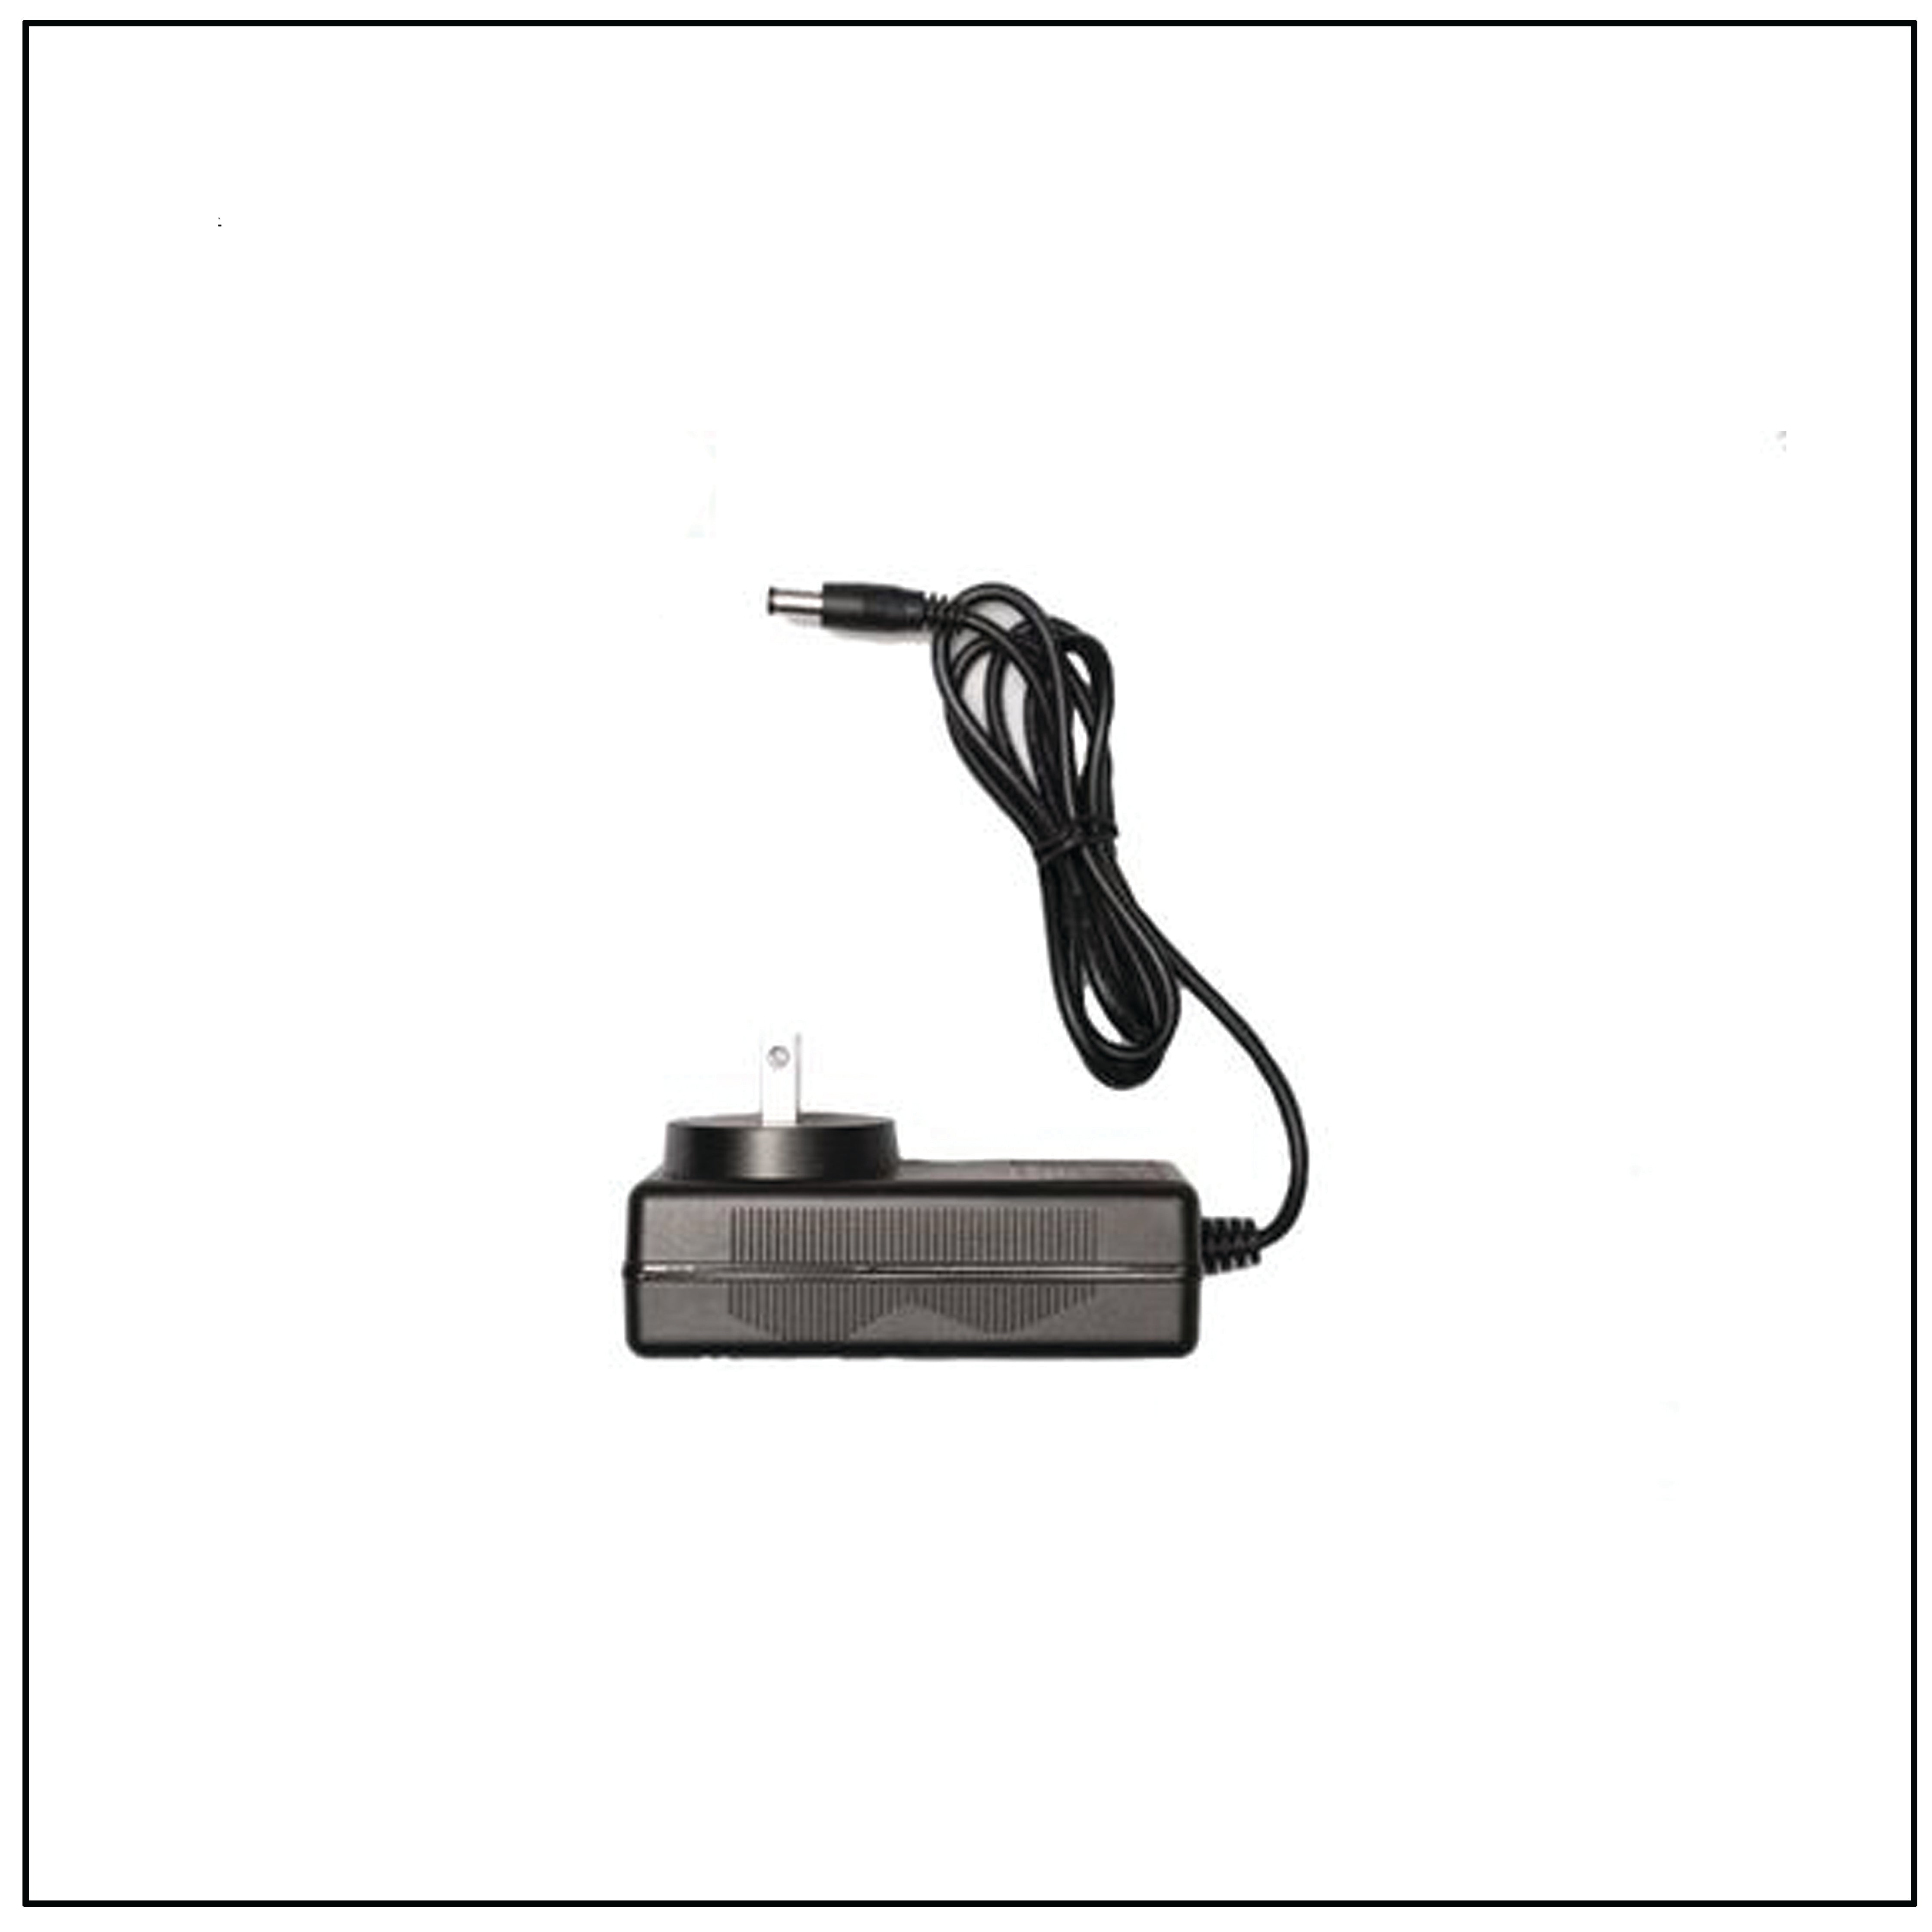 Battery charger for 12V Heated Vest Battery